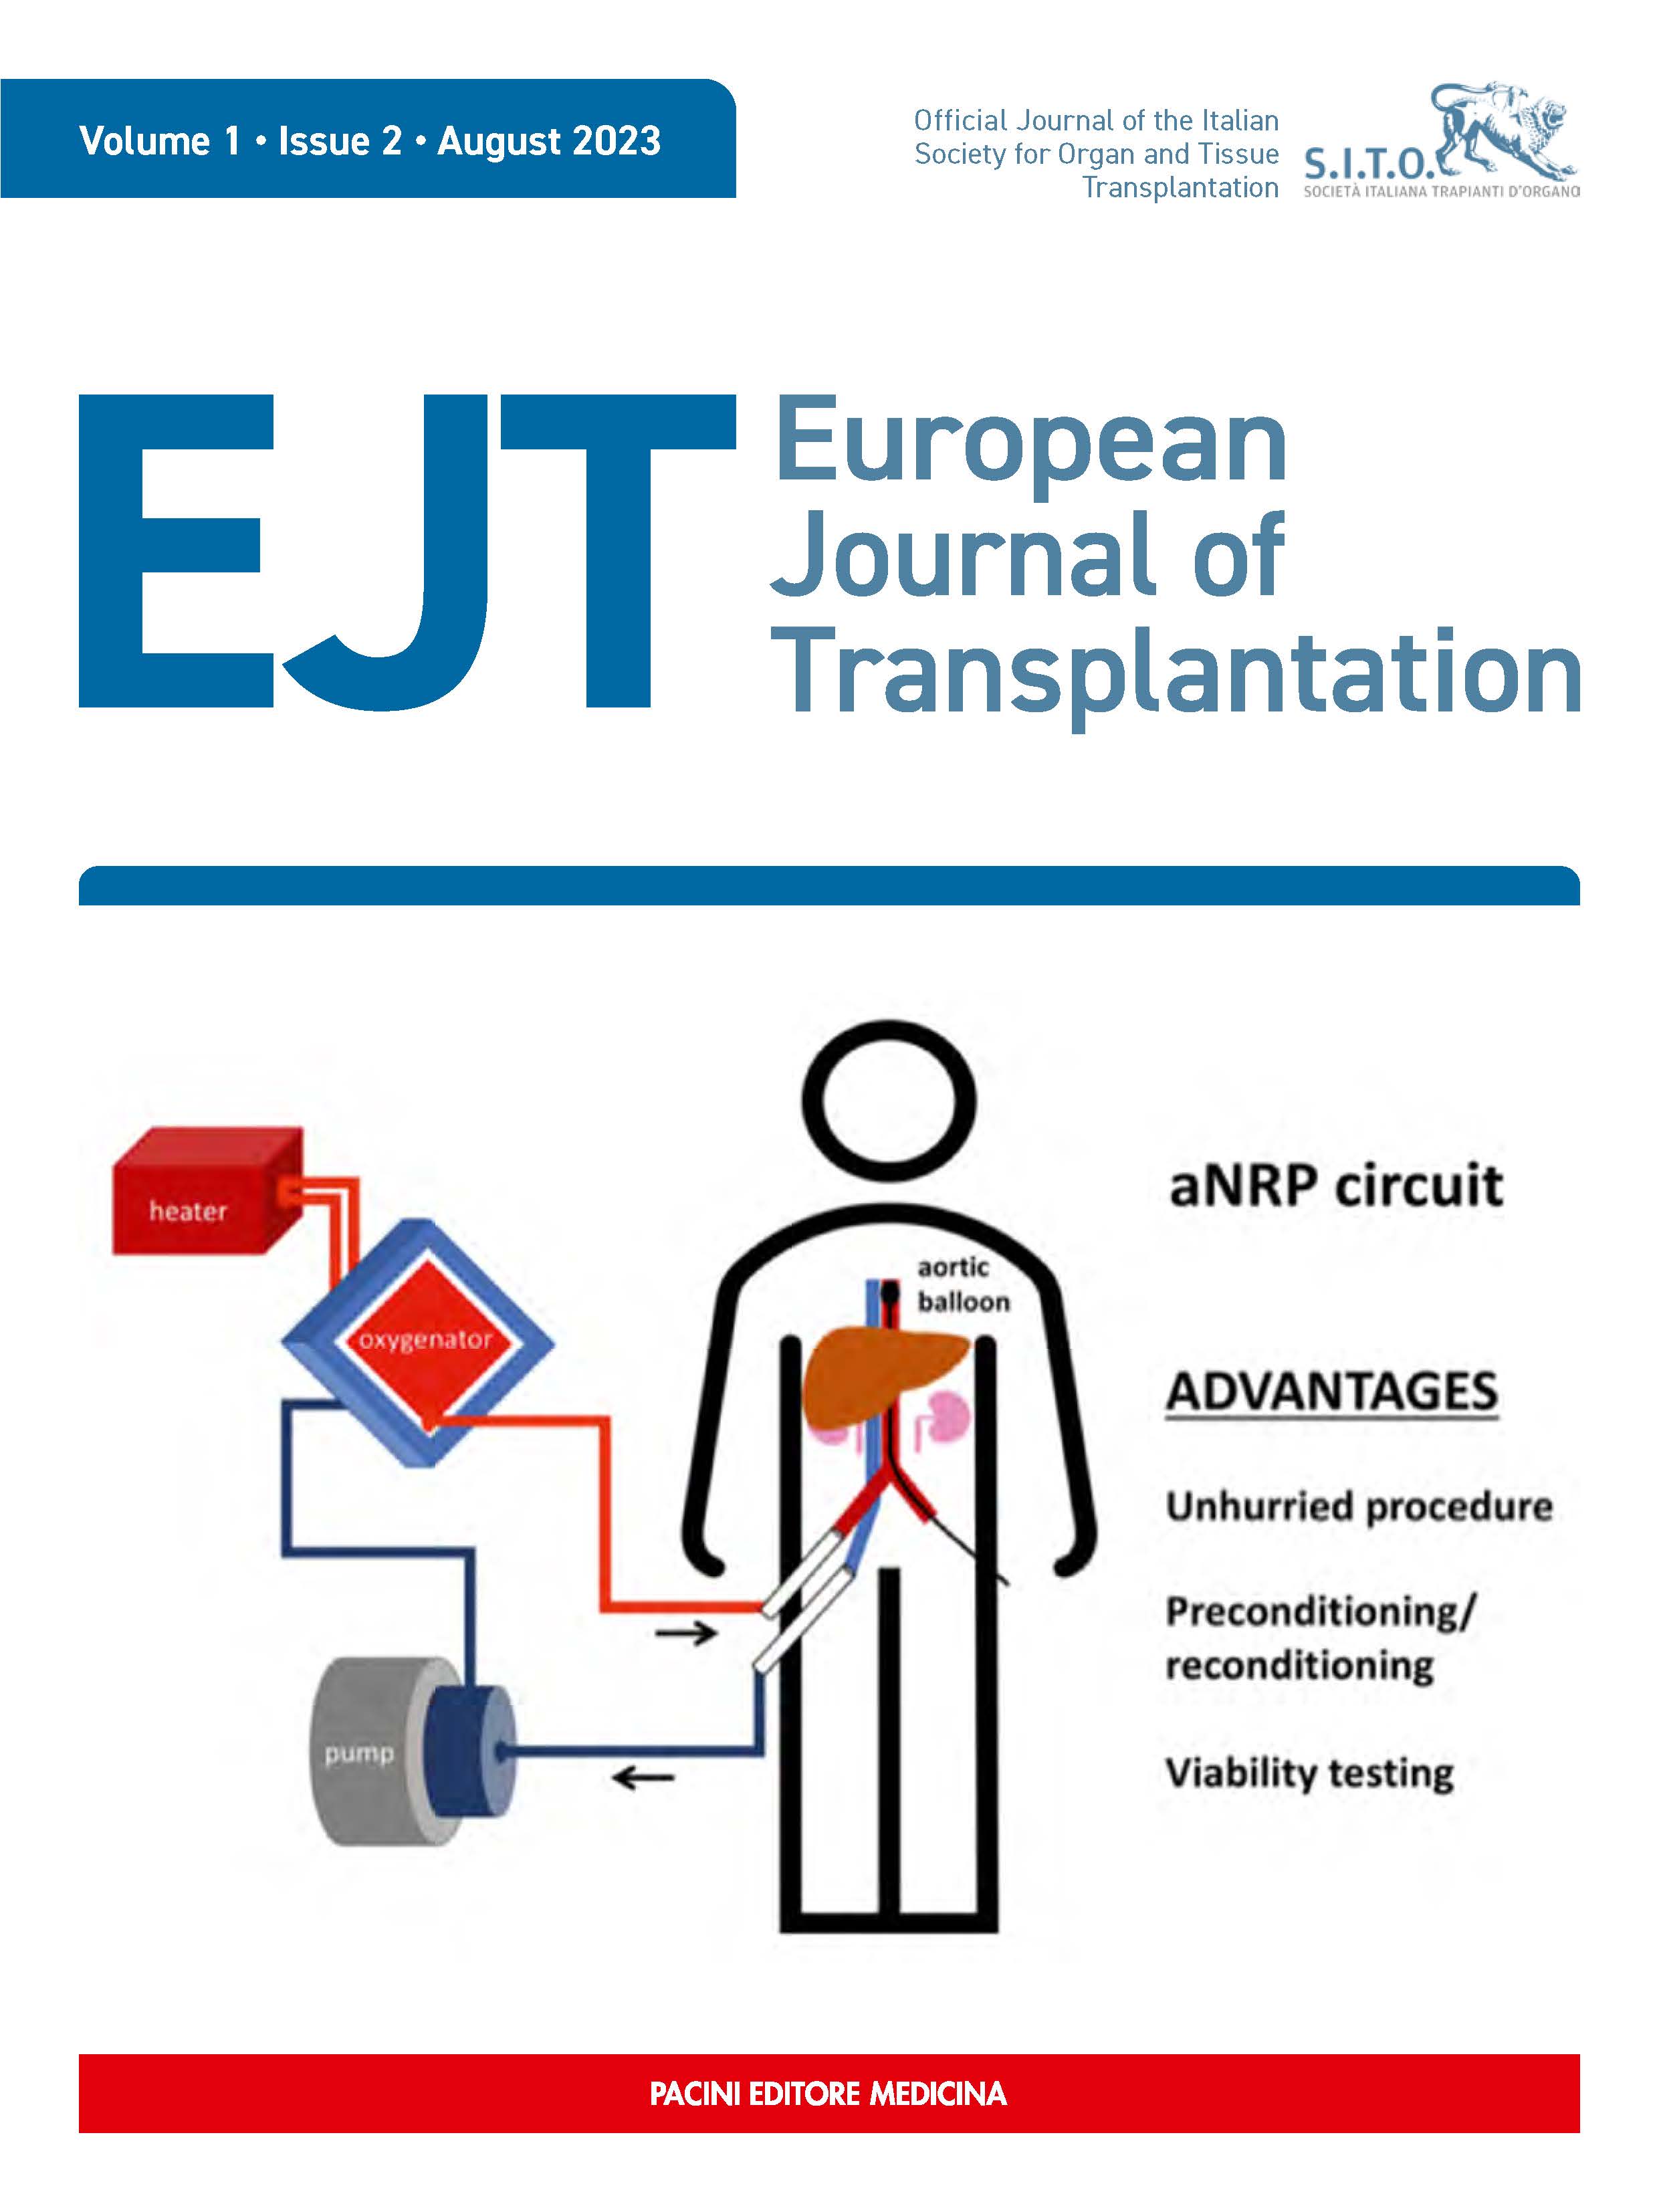 Special Issue 2 - August 2023 - Machine perfusion in organ transplantation